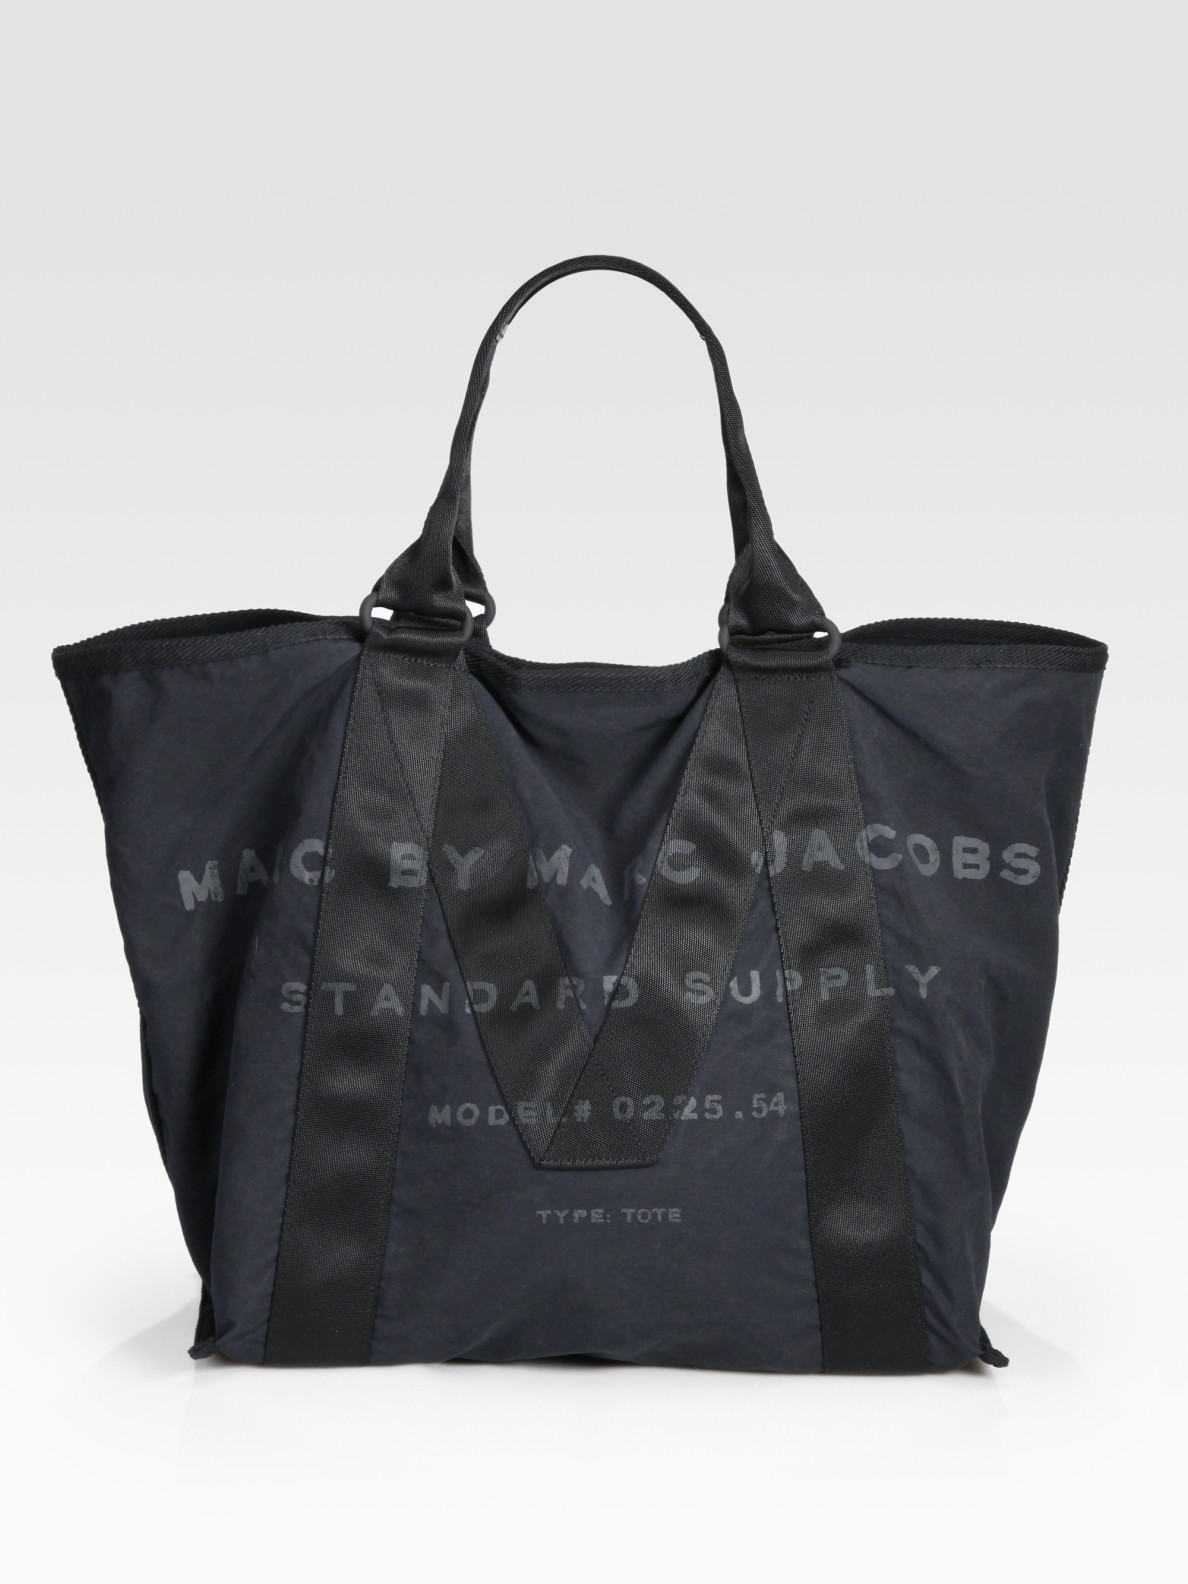 Marc By Marc Jacobs M Standard Supply Canvas Tote Bag in Black | Lyst